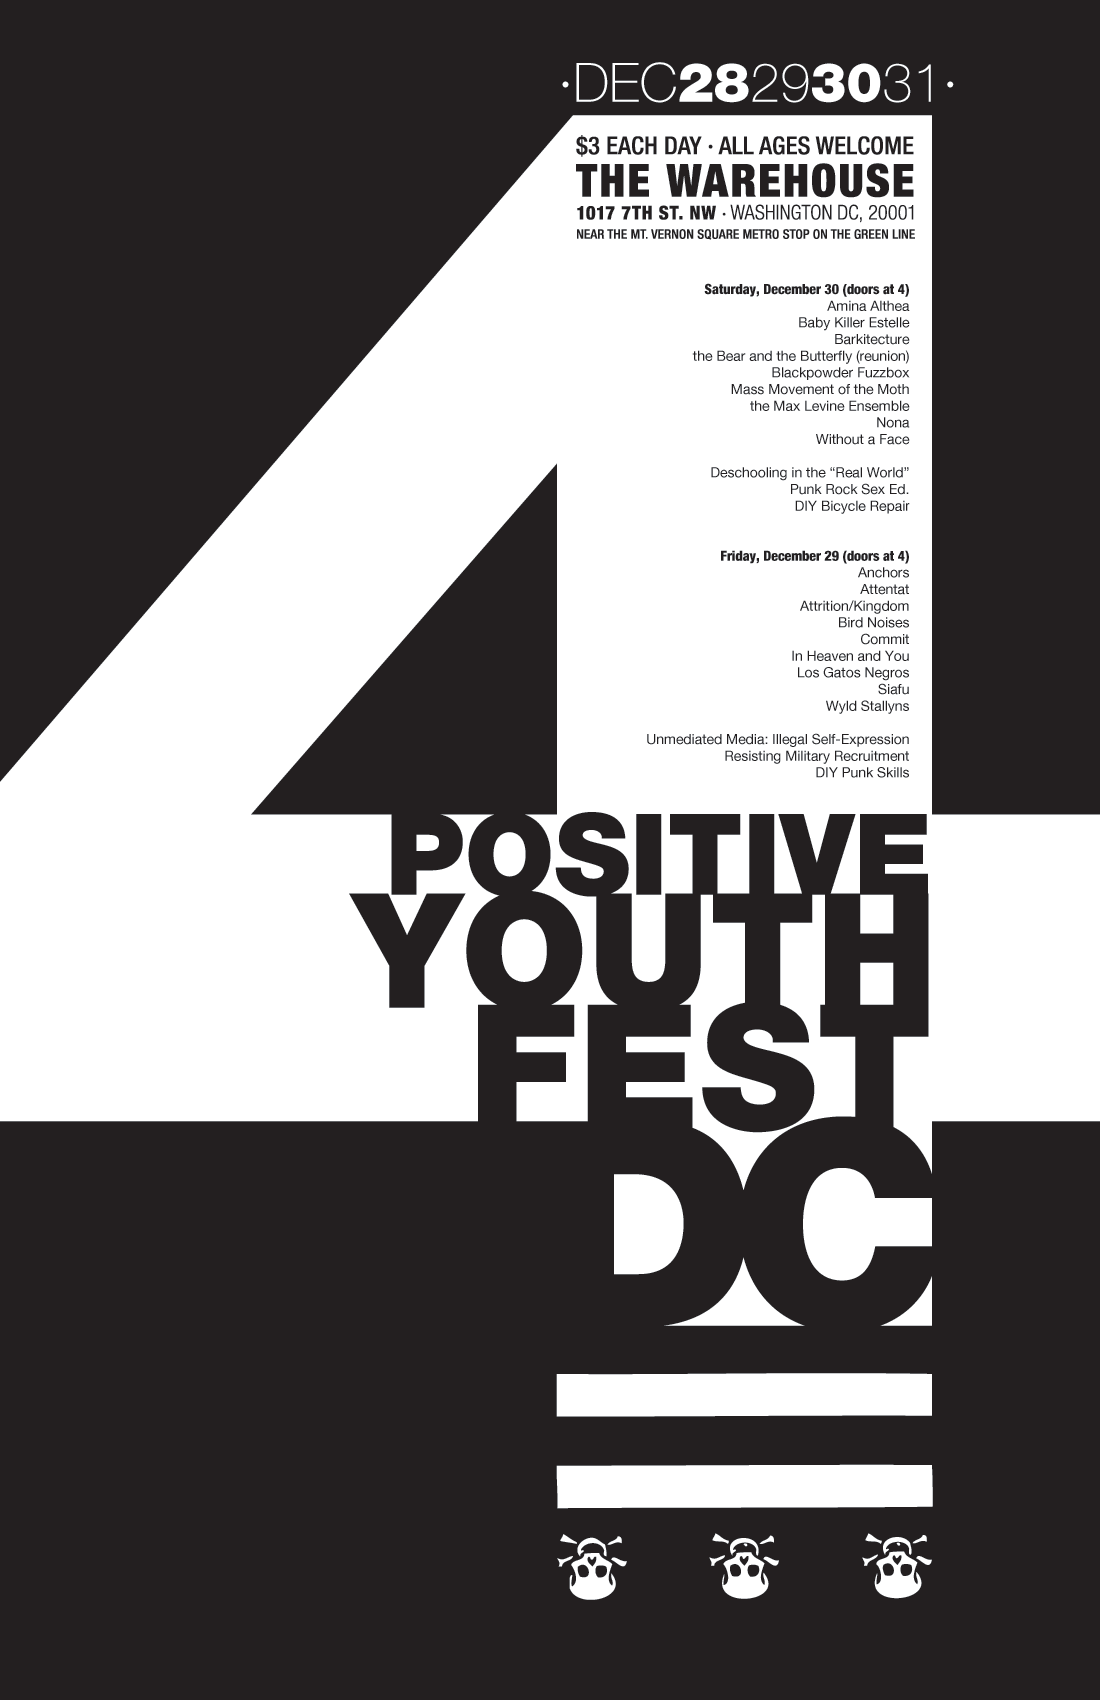 Positive Youth Fest 4 poster